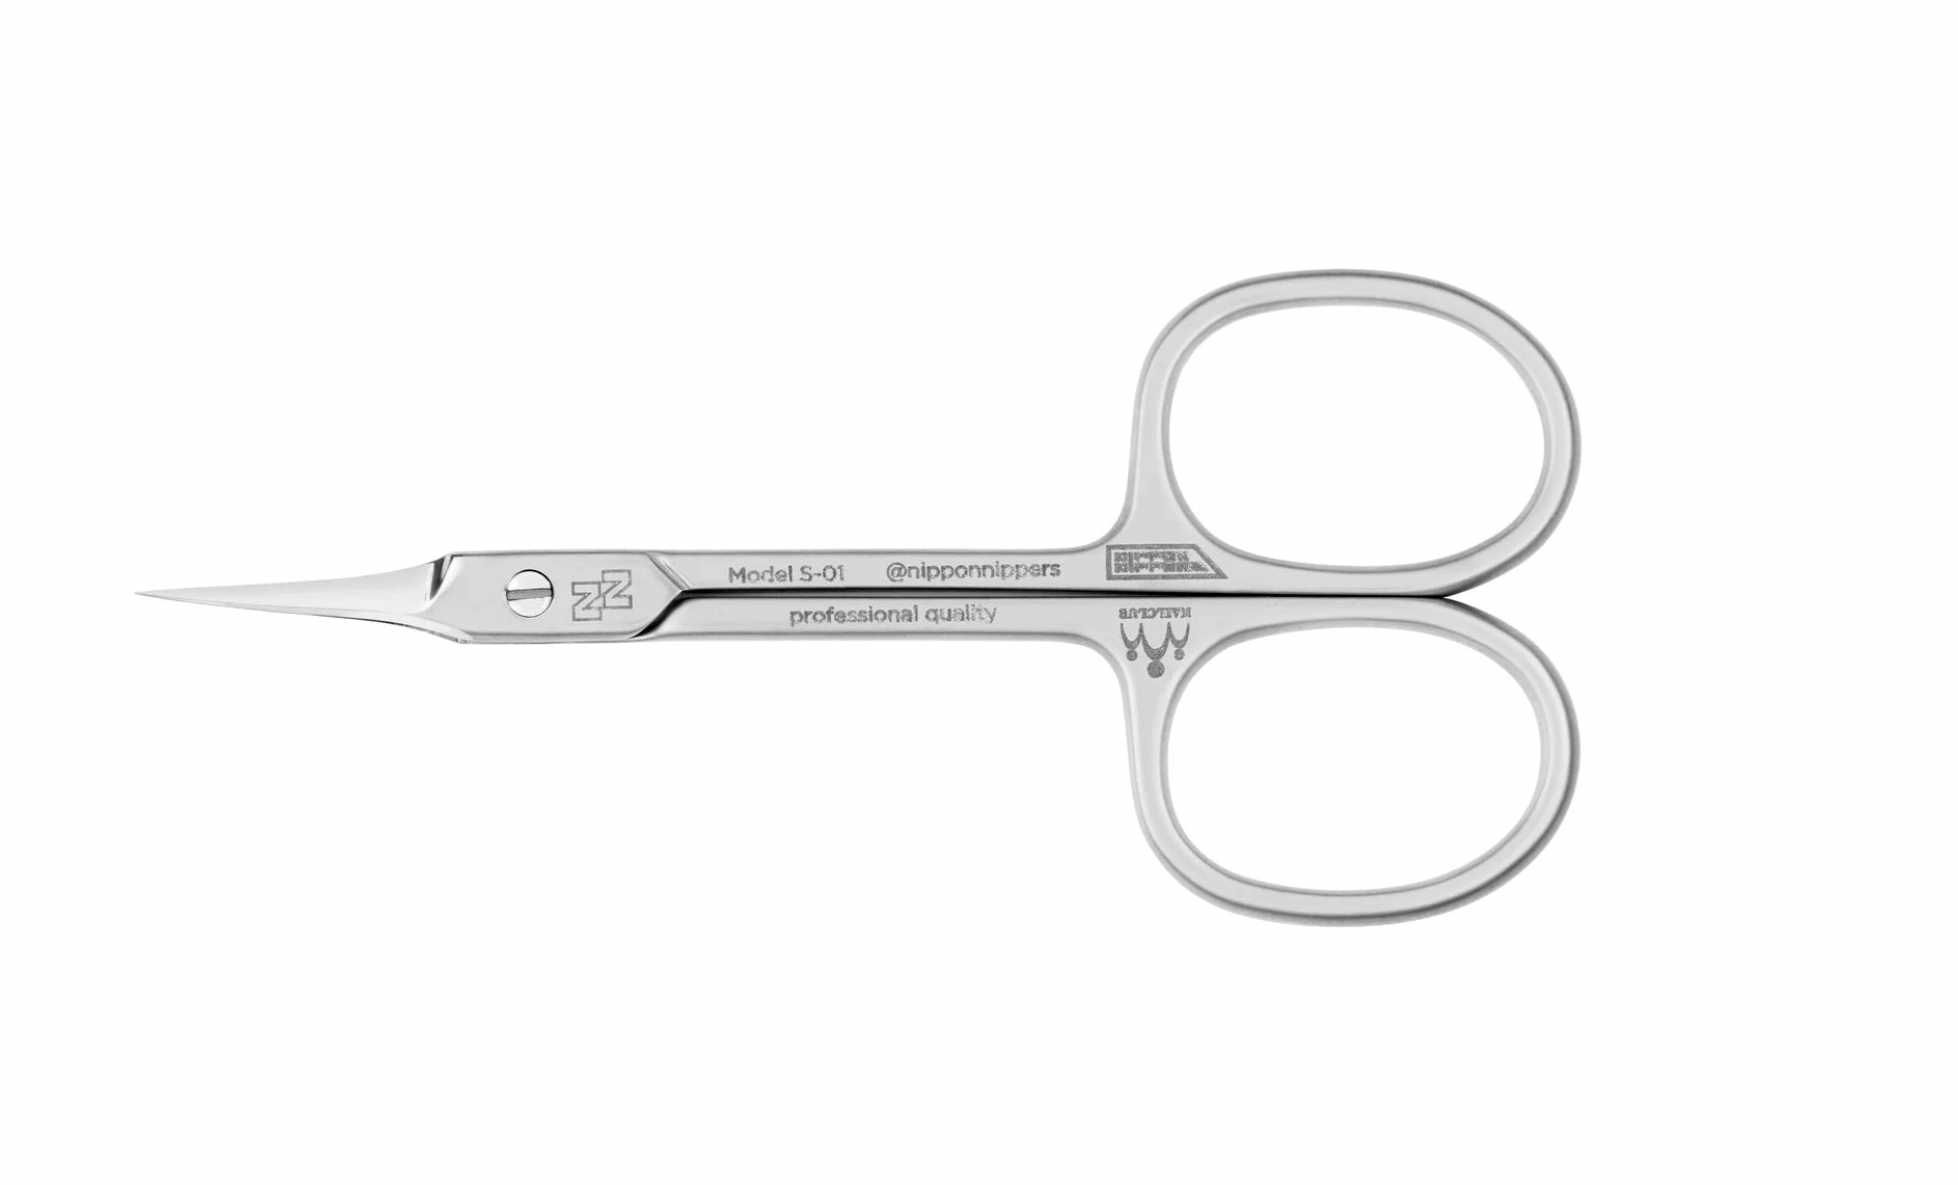  FOMIYES 1pc Leather Scissors Silicone Nail Tools